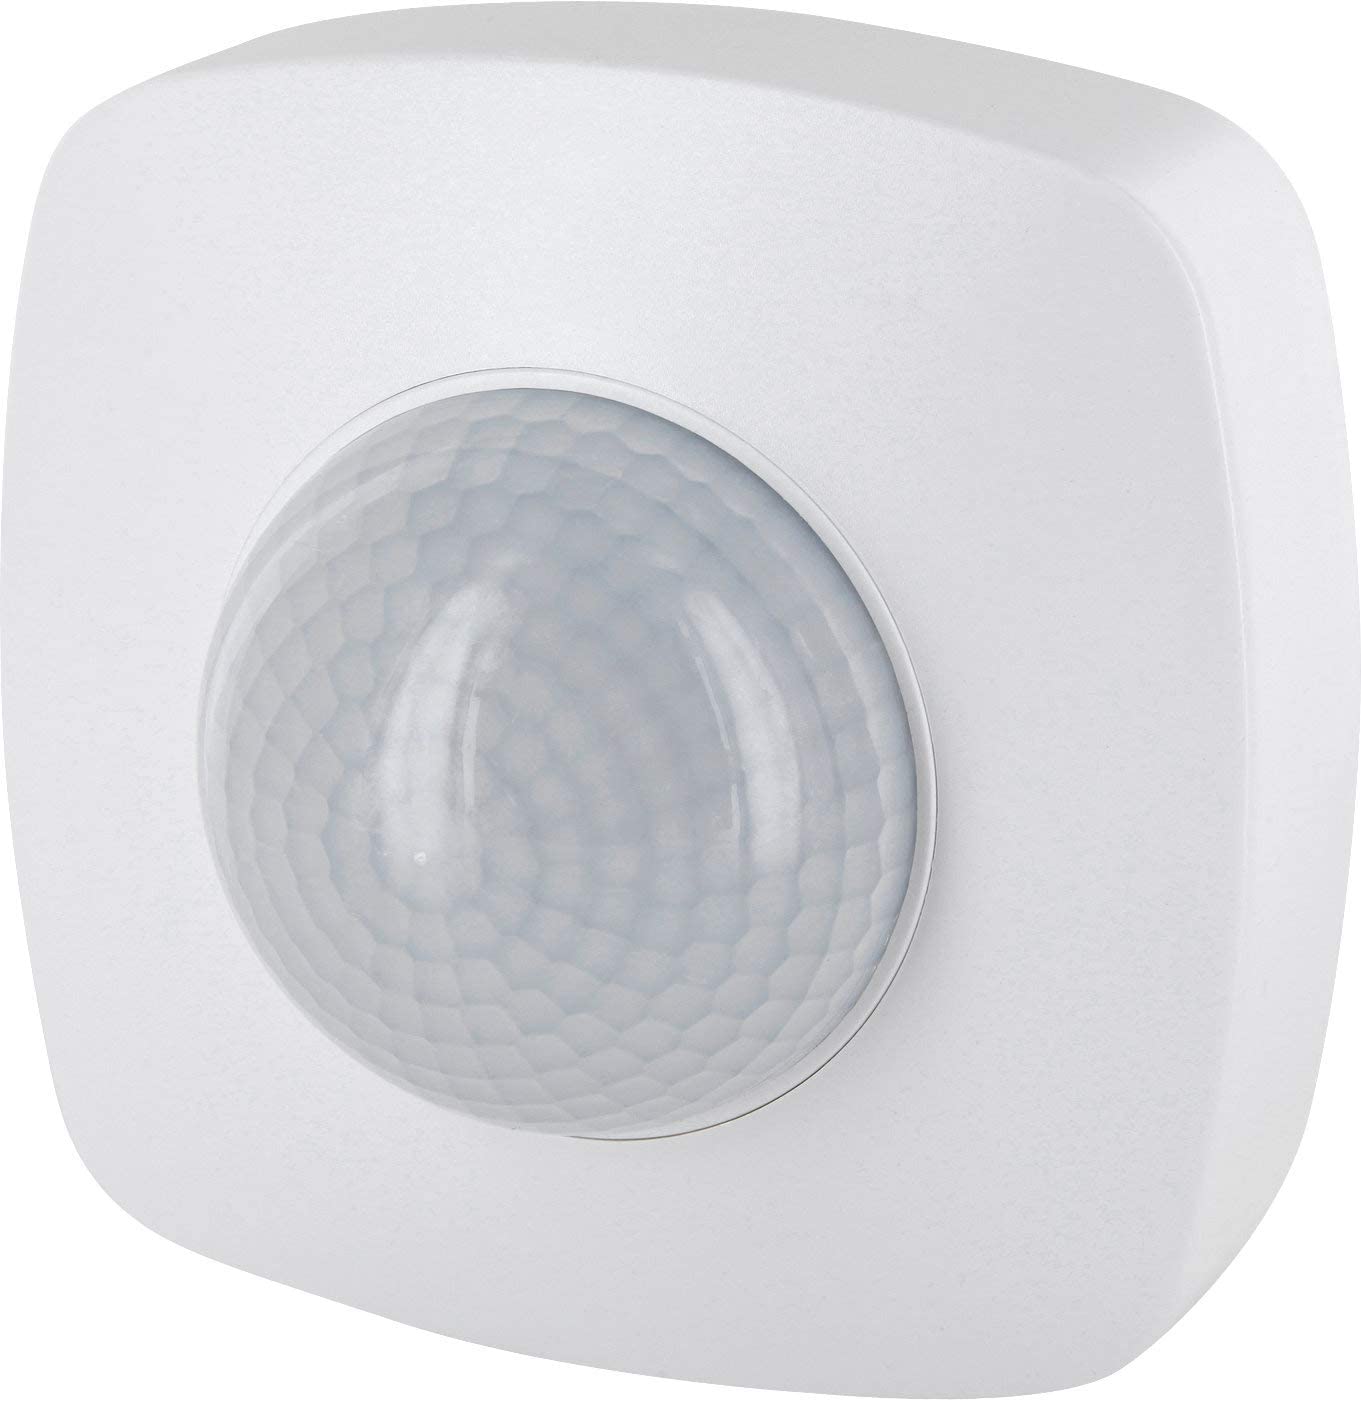 ALIO PRO PS-360-20IW Presence detector, surface mounted, 360 degree, 20m diameter, IP65, 2000W